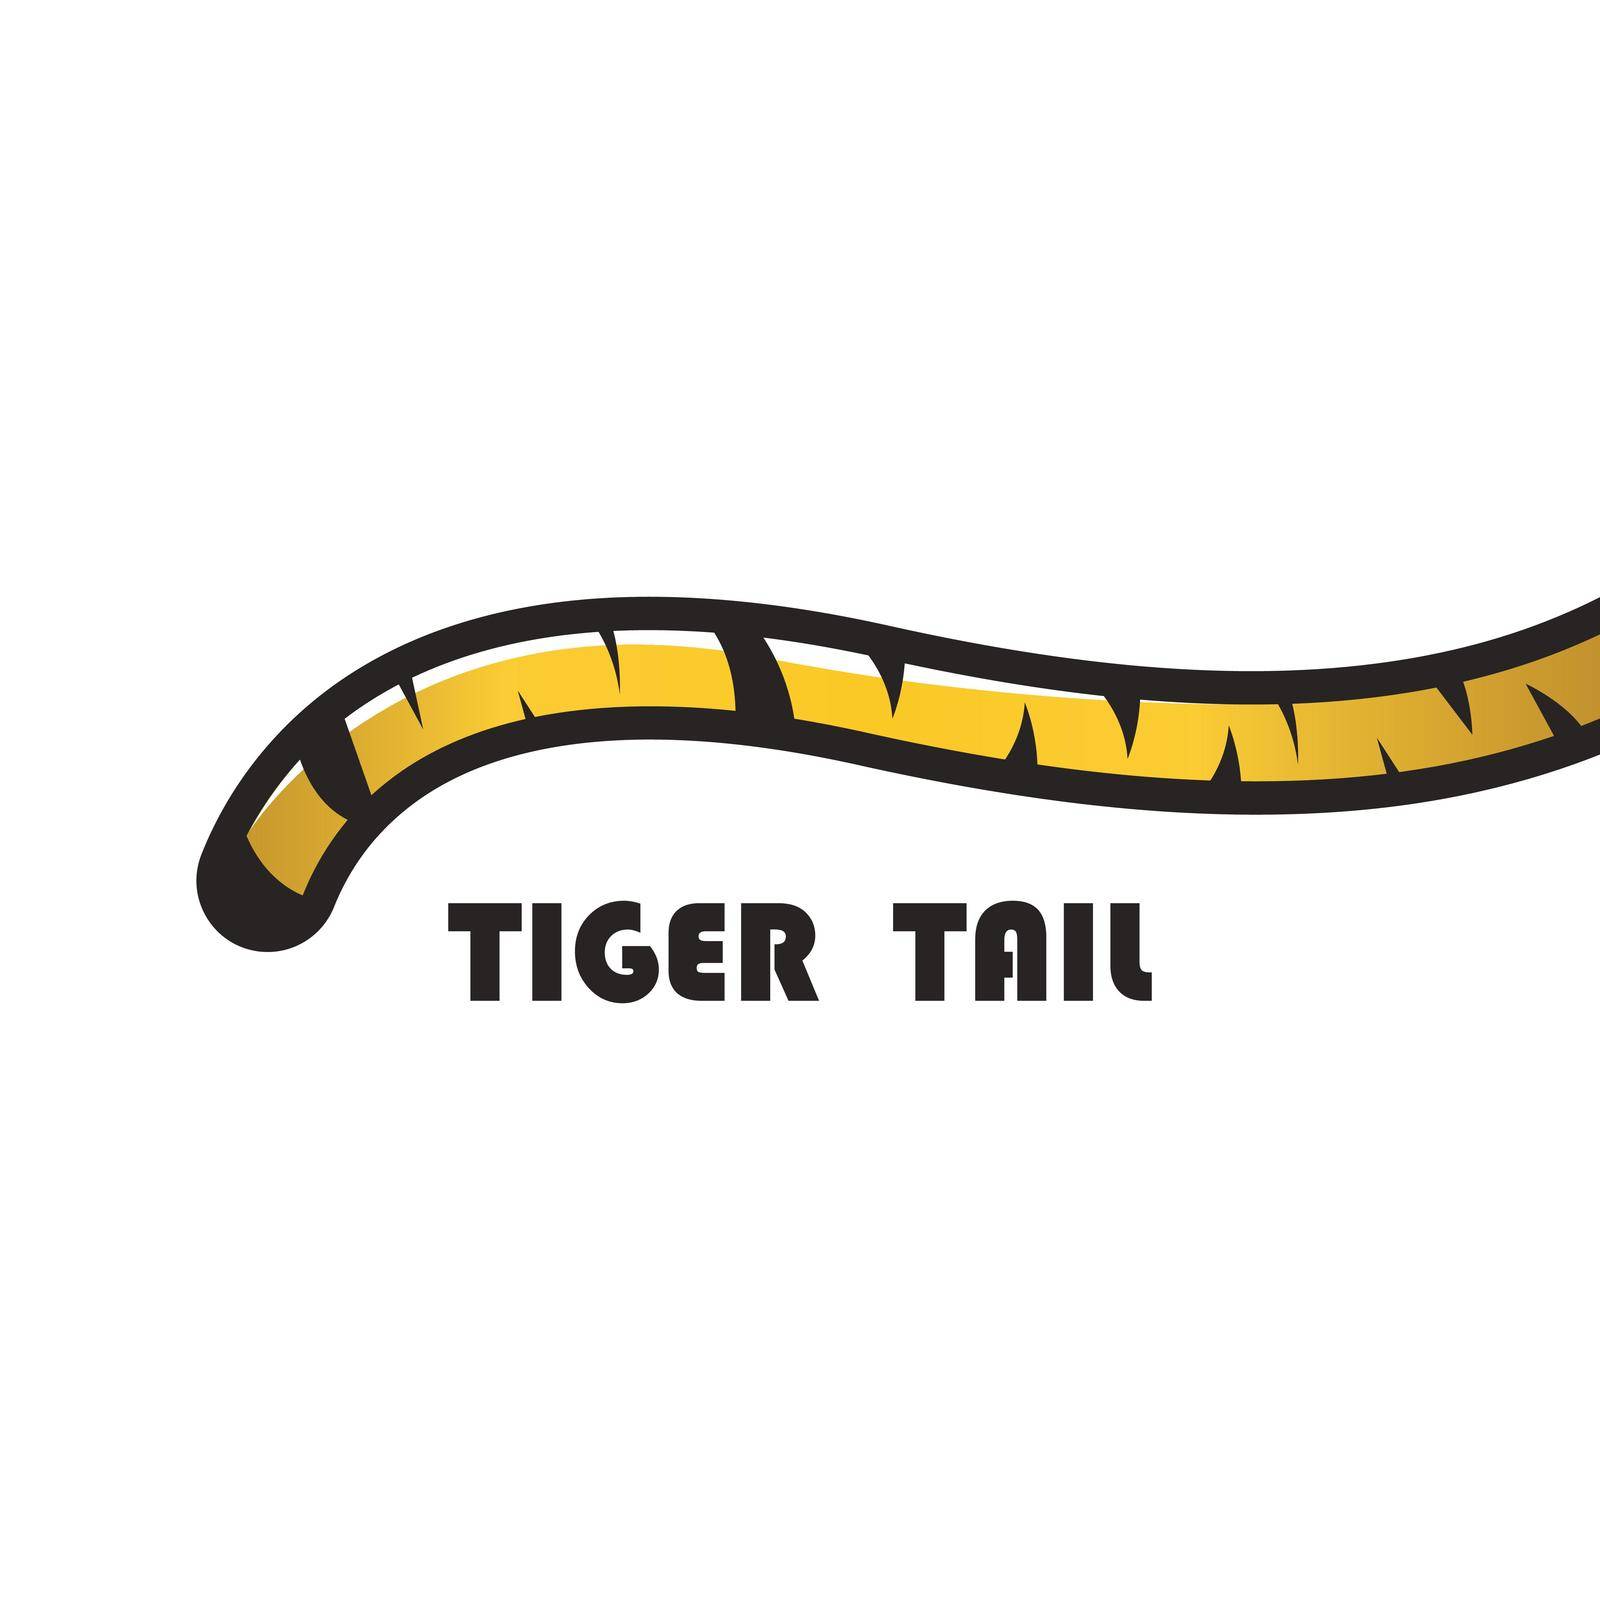 Tiger tail icon vector illustration logo background.